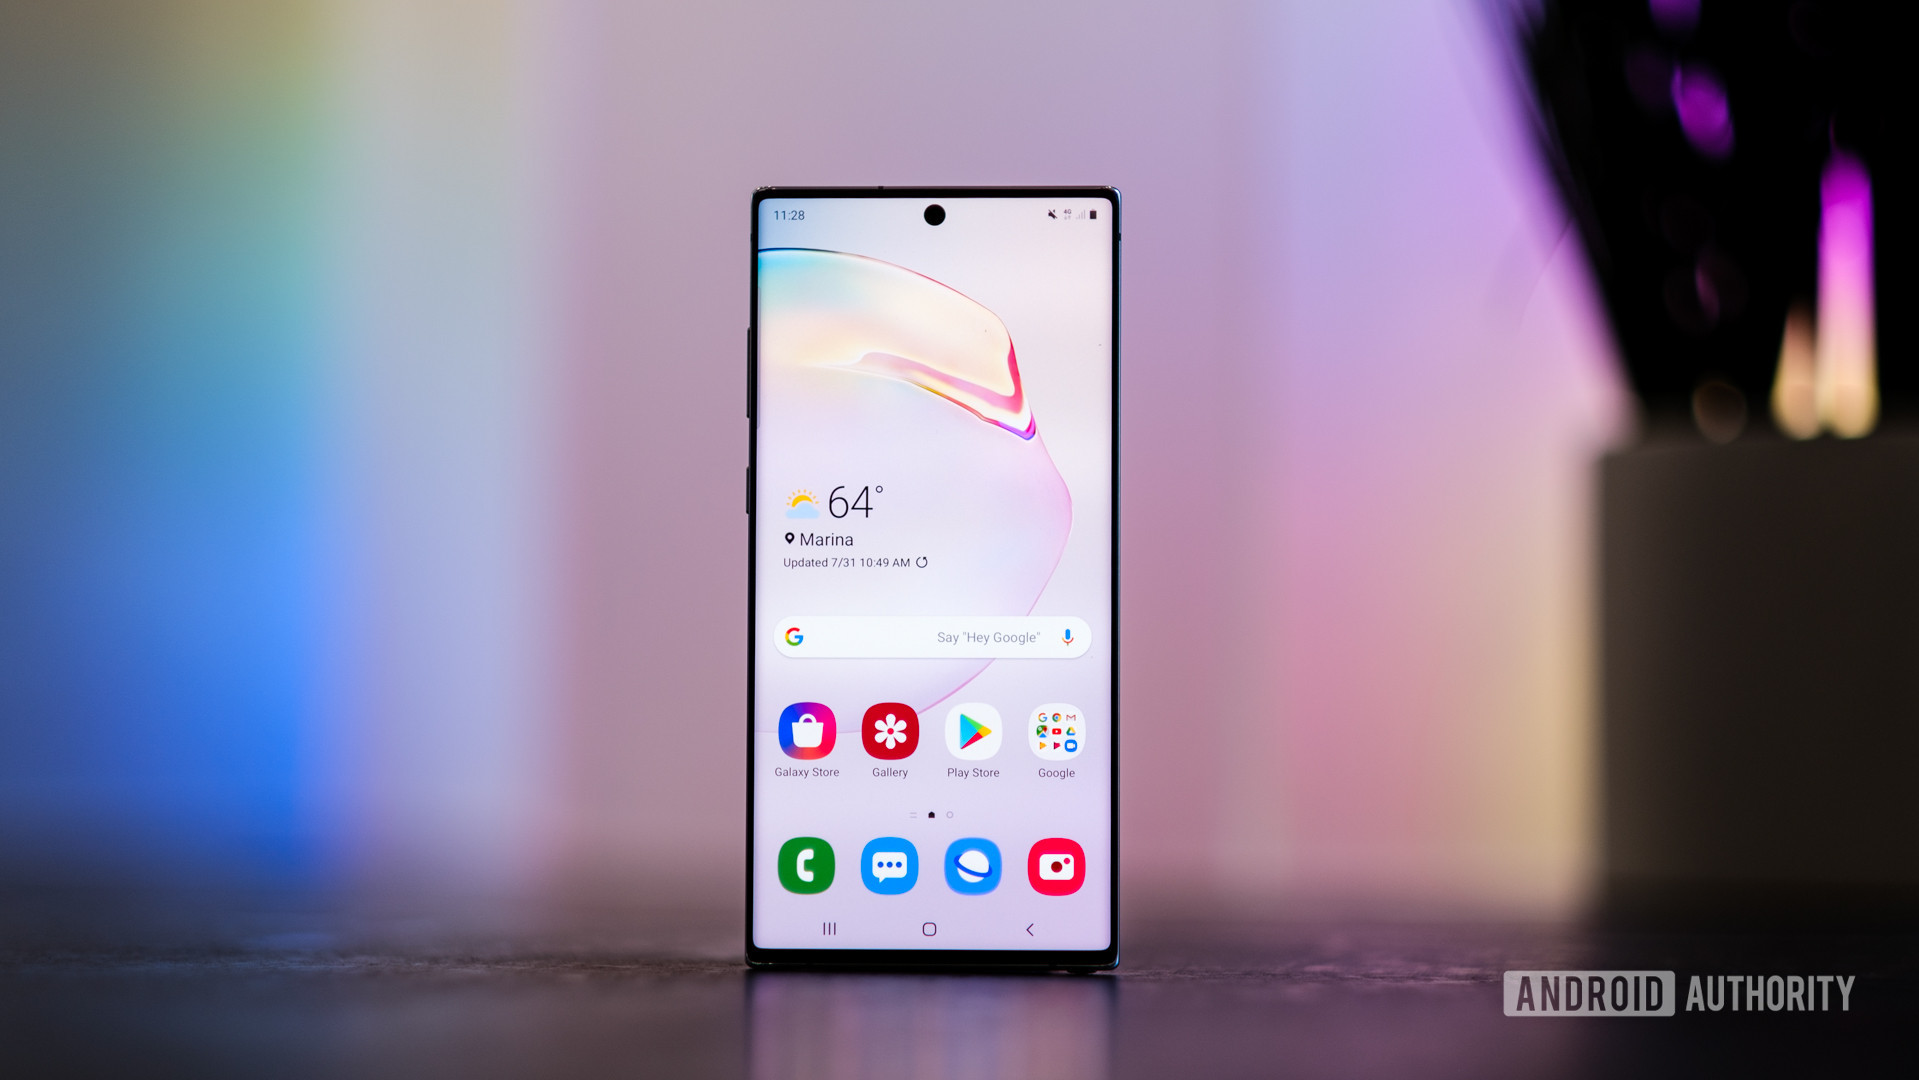 Samsung Galaxy Note 10 Plus showing the screen, powered by the Snapdragon 855, one of the best Android processors